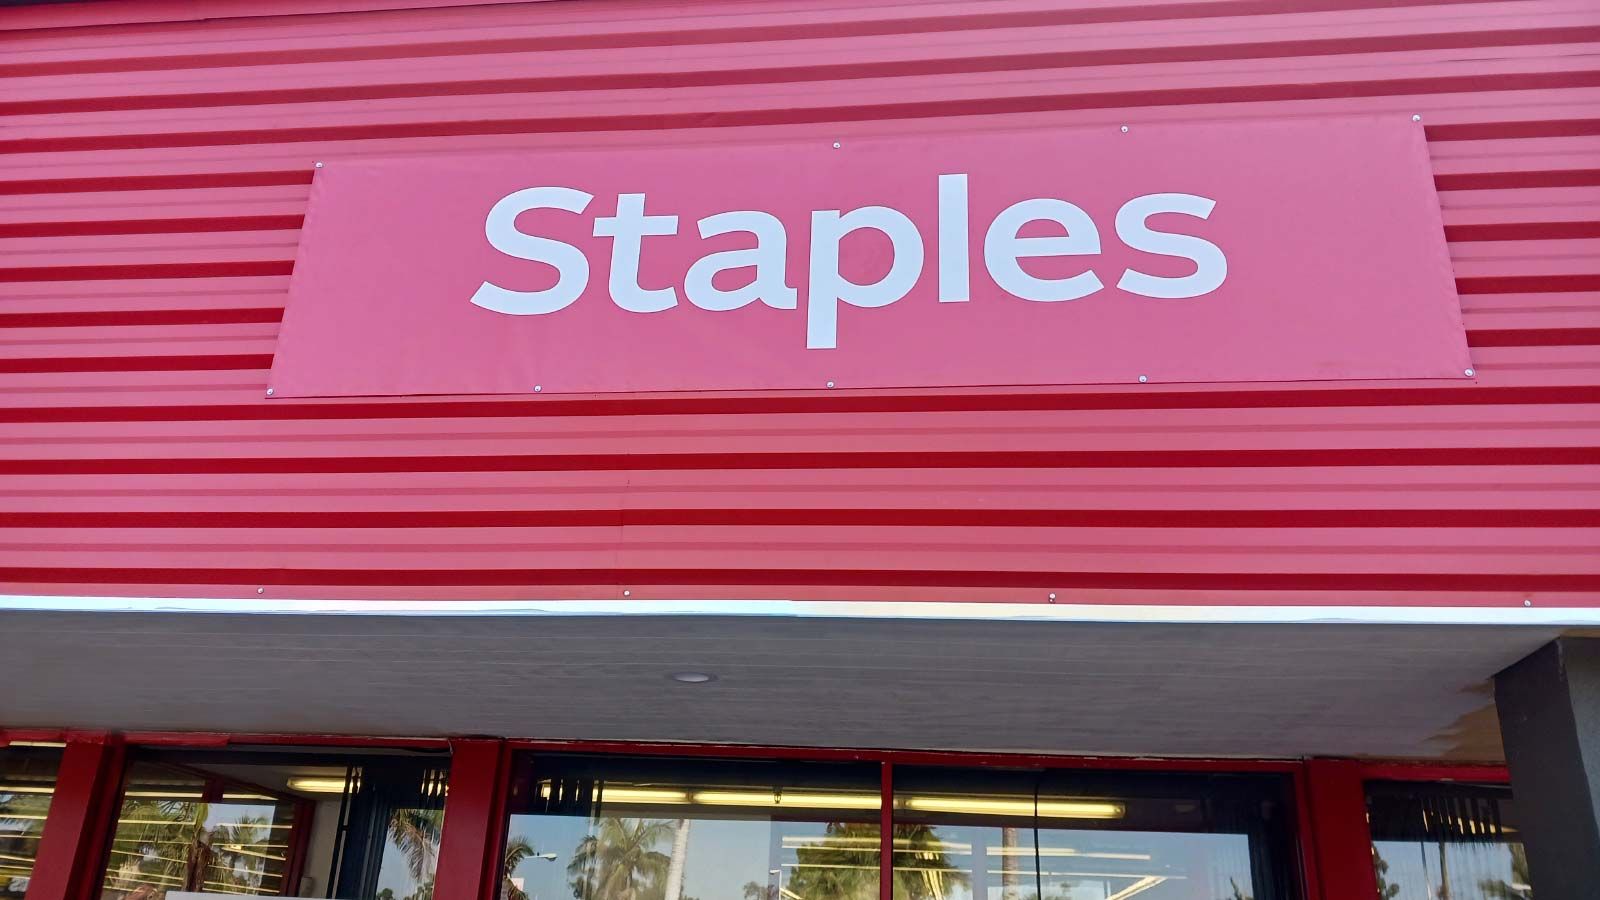 Staples banner decorating the storefront